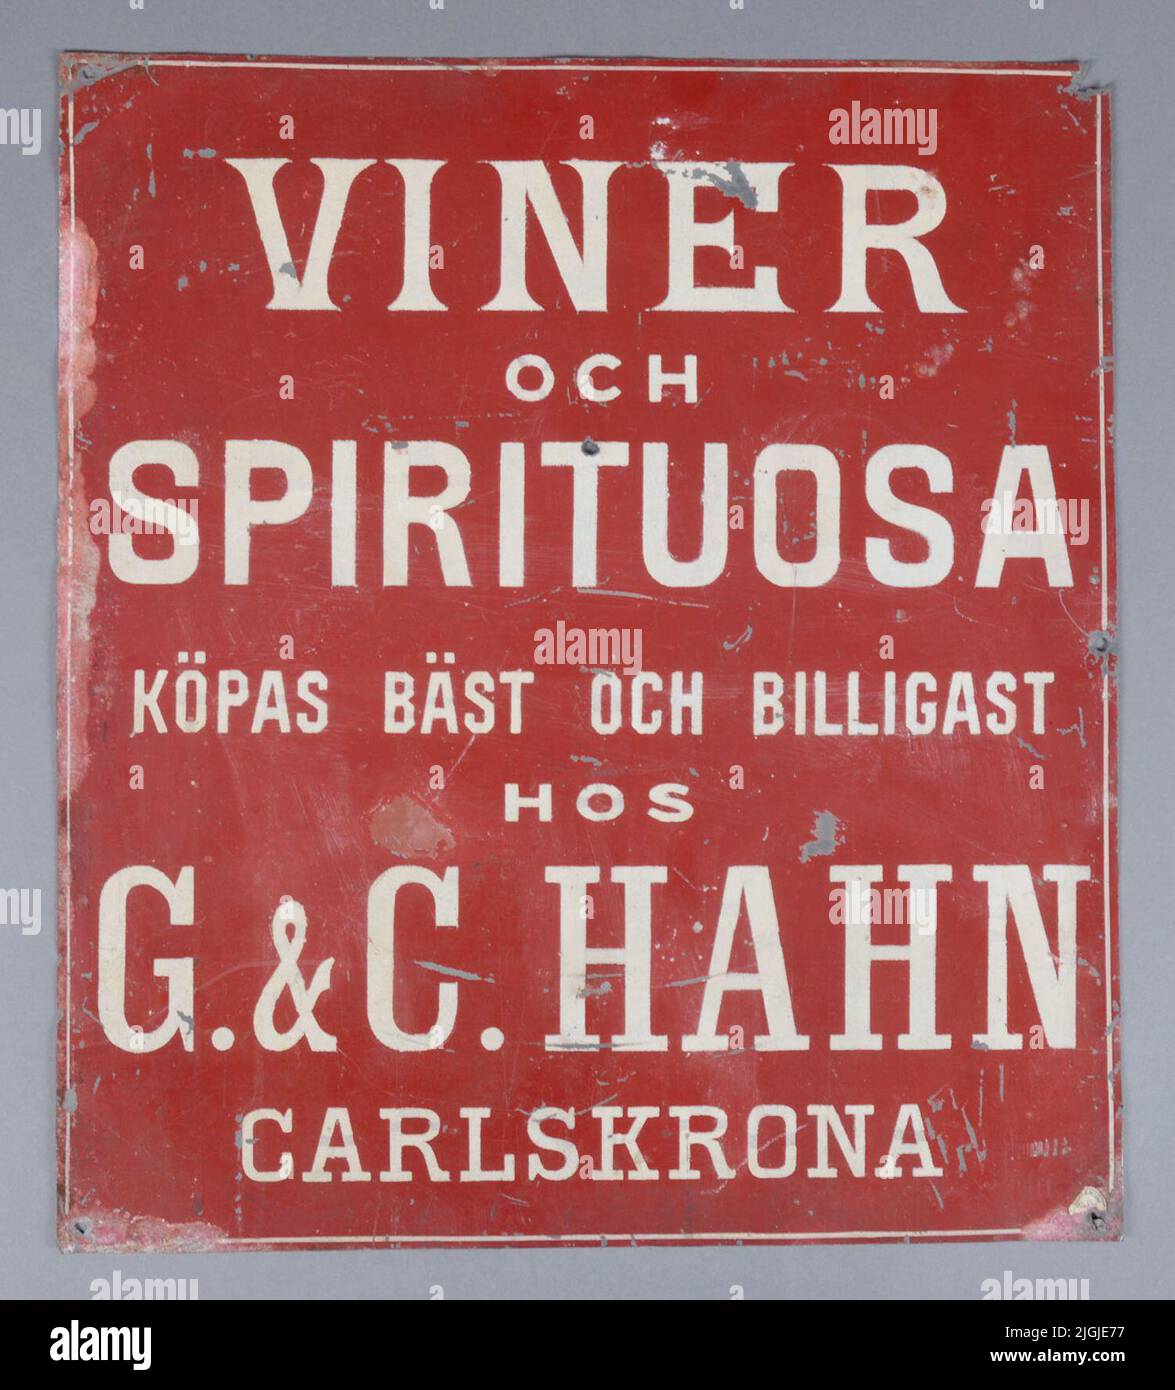 https://c8.alamy.com/comp/2JGJE77/skylt-sign-of-sheet-metal-white-text-on-red-bottom-wines-and-spirituals-are-best-purchased-and-cheapest-at-g-c-hahn-carlskrona-the-deal-was-located-on-ronnebygatan-50-kv-dahlberg-1-gift-1962-by-color-dealer-sven-hkansson-karlskrona-2JGJE77.jpg